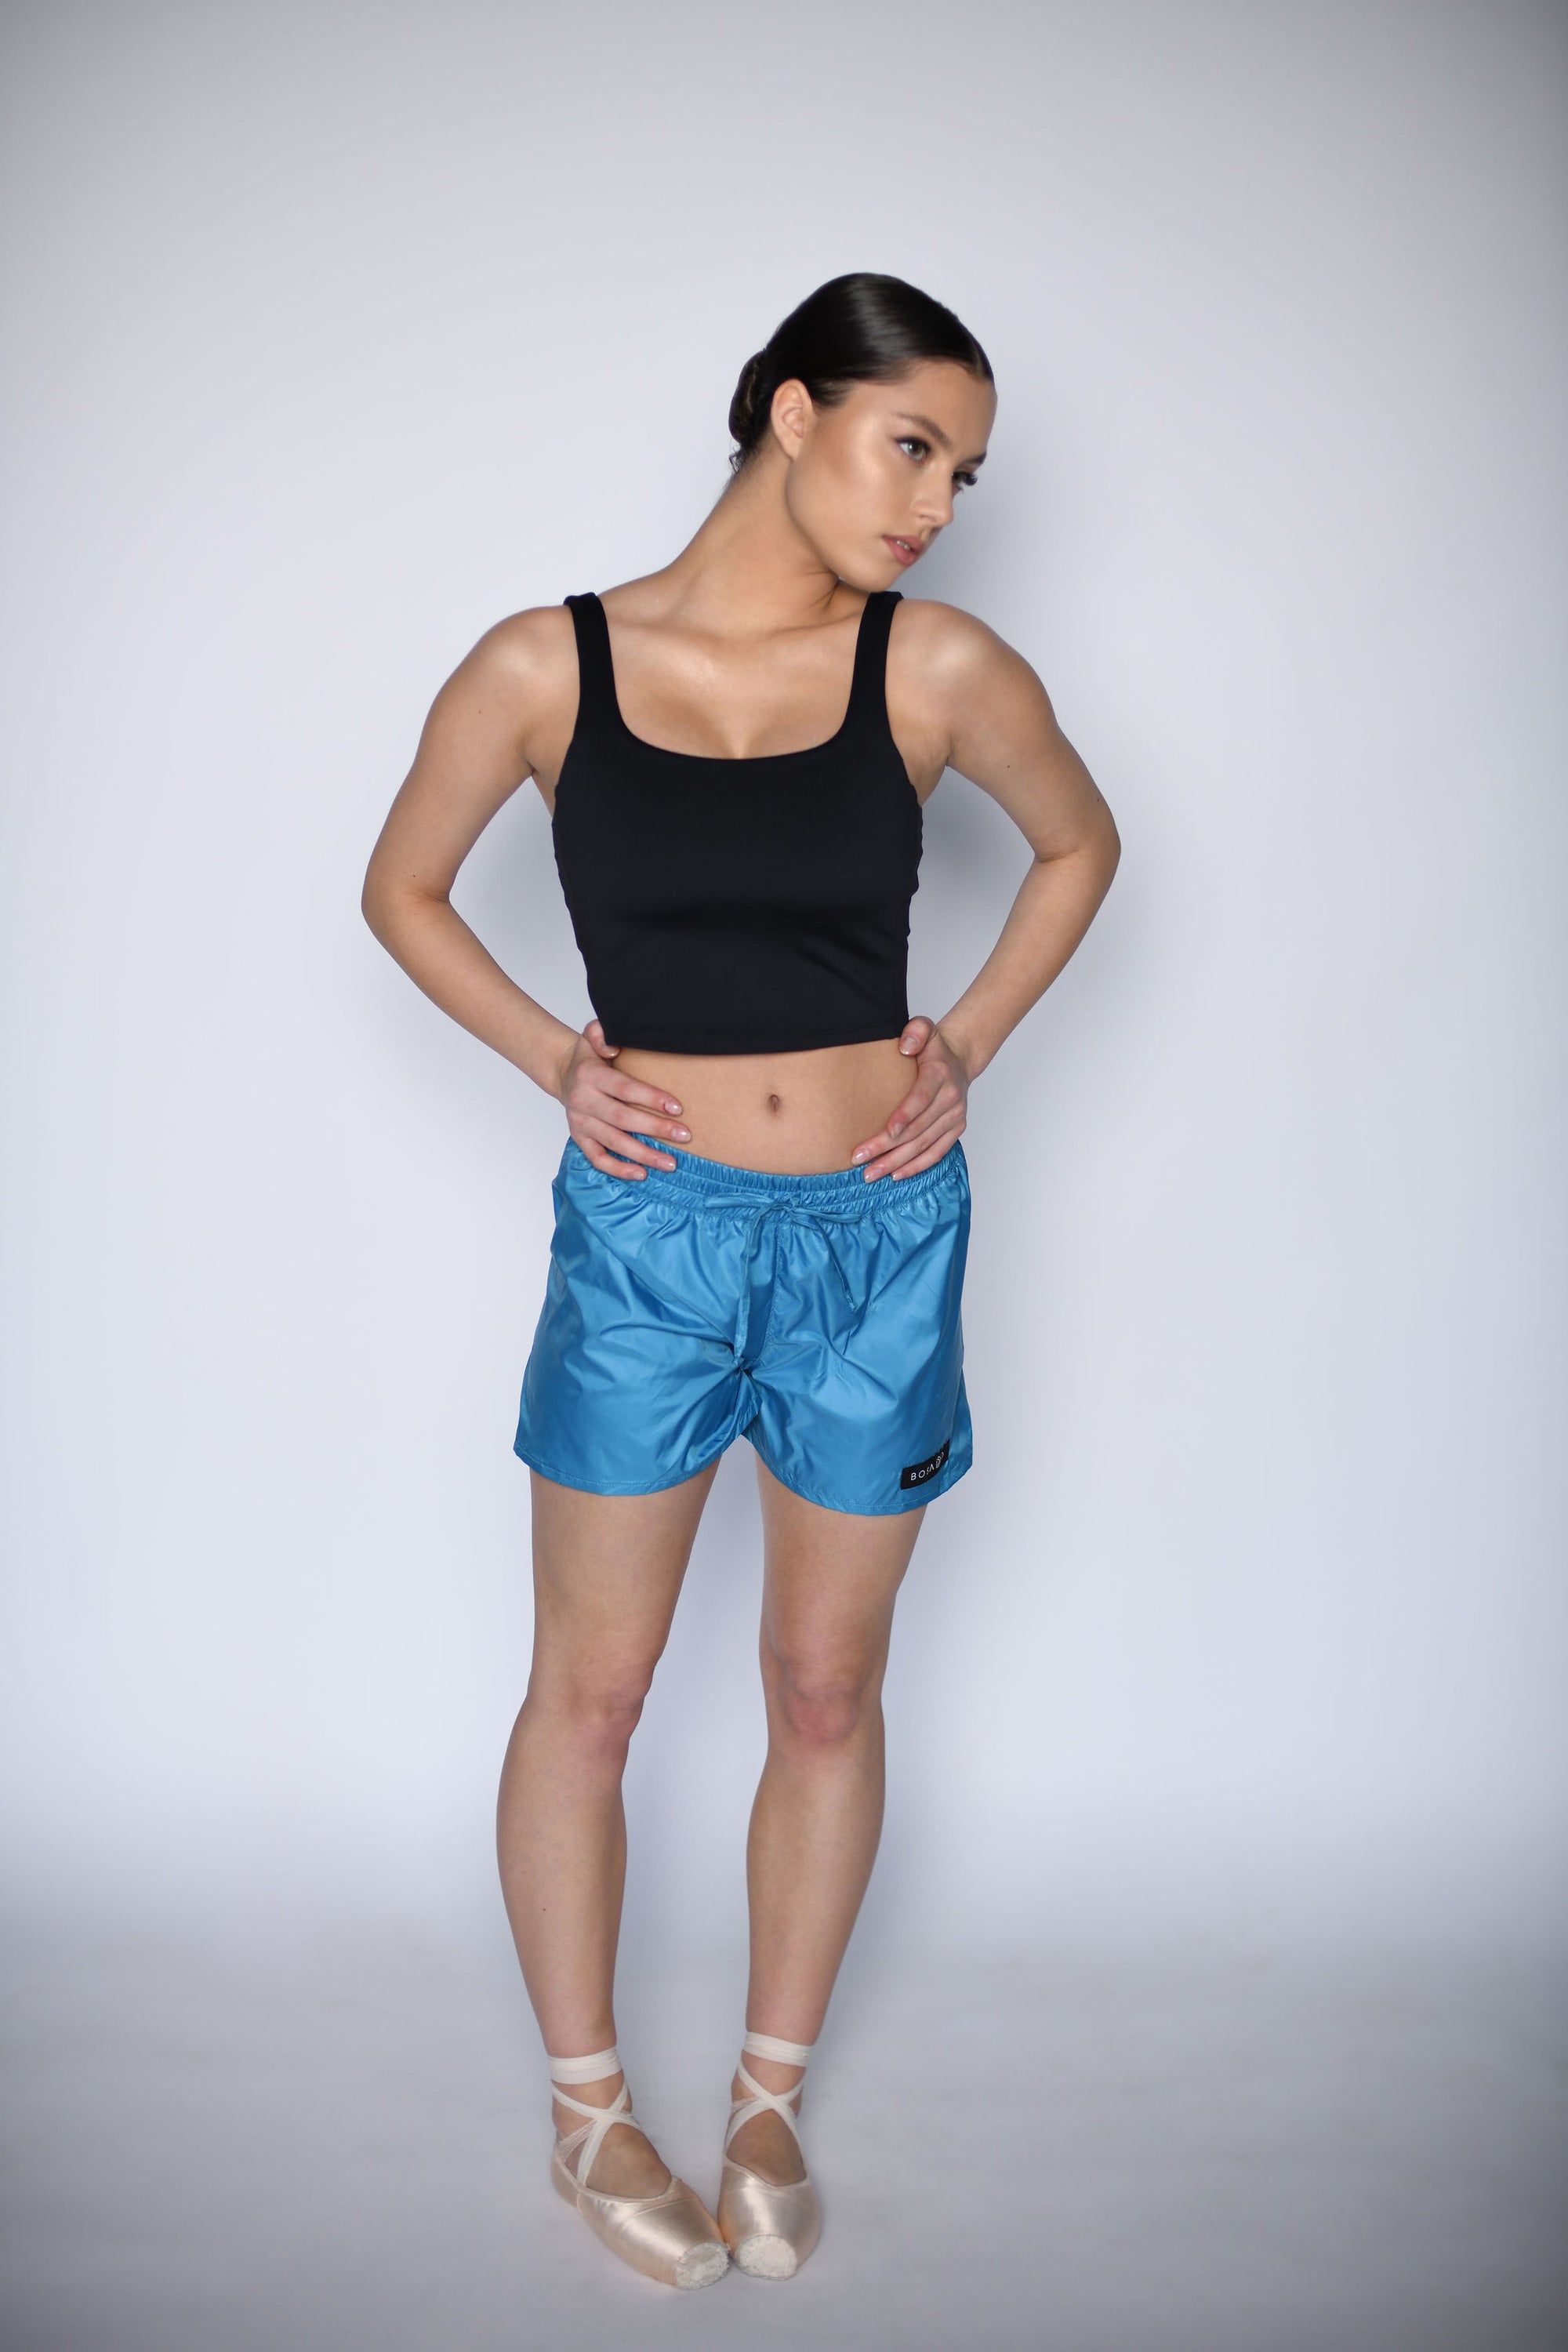 NEW URBAN SWAN COLLECTION S/S 23 | Ice blue shorts